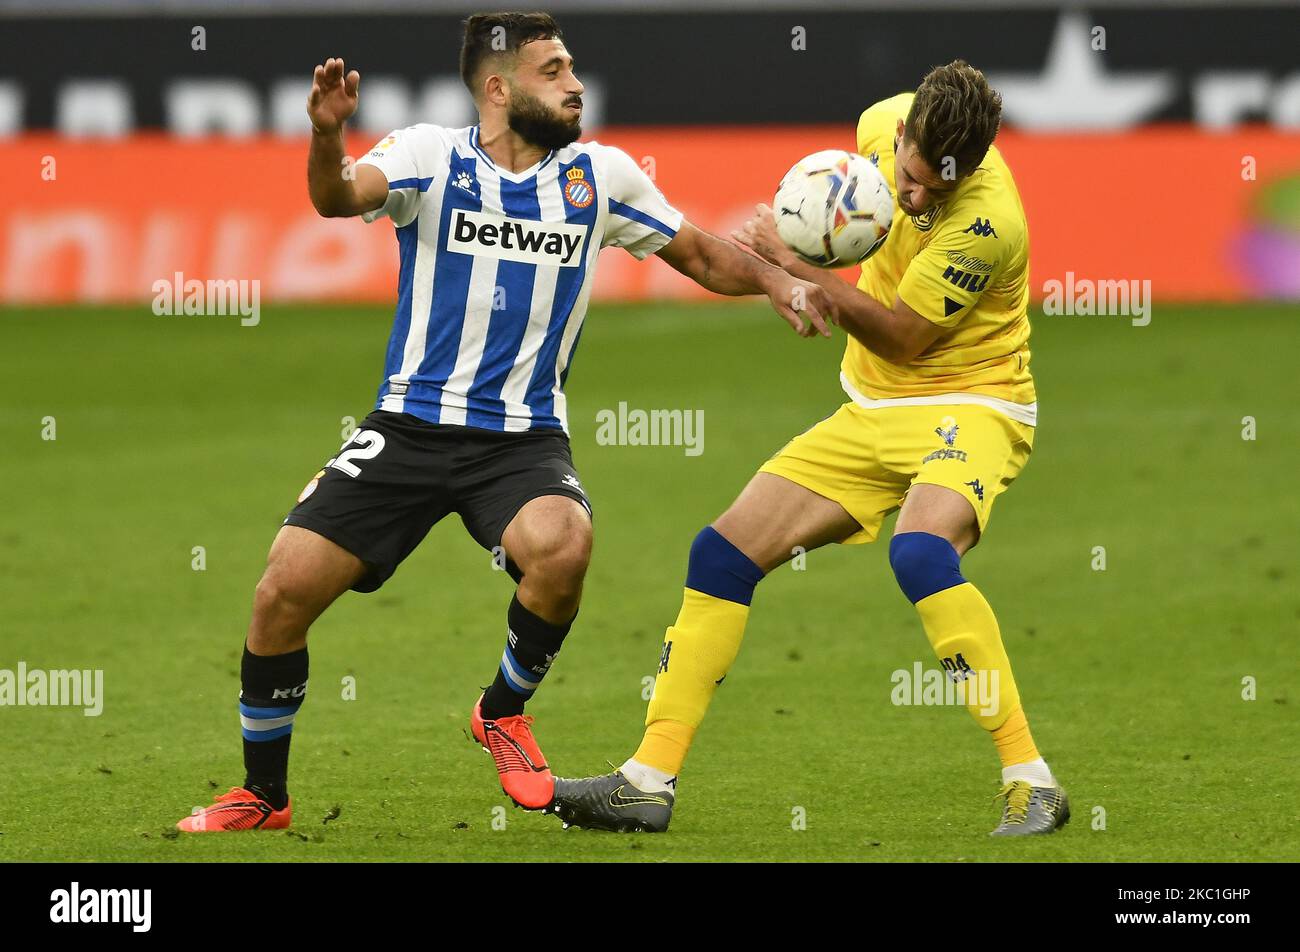 Matias Vargas and Jose Carlos Ramirez during the match between RCD Espanyol and A.D. Alcorcon, corresponding to the week 5 ofvthe Liga Smartbank, played at the RCDE Stadium, on 10th October 2020, in Barcelona, Spain. (Photo by Urbanandsport/NurPhoto) Stock Photo